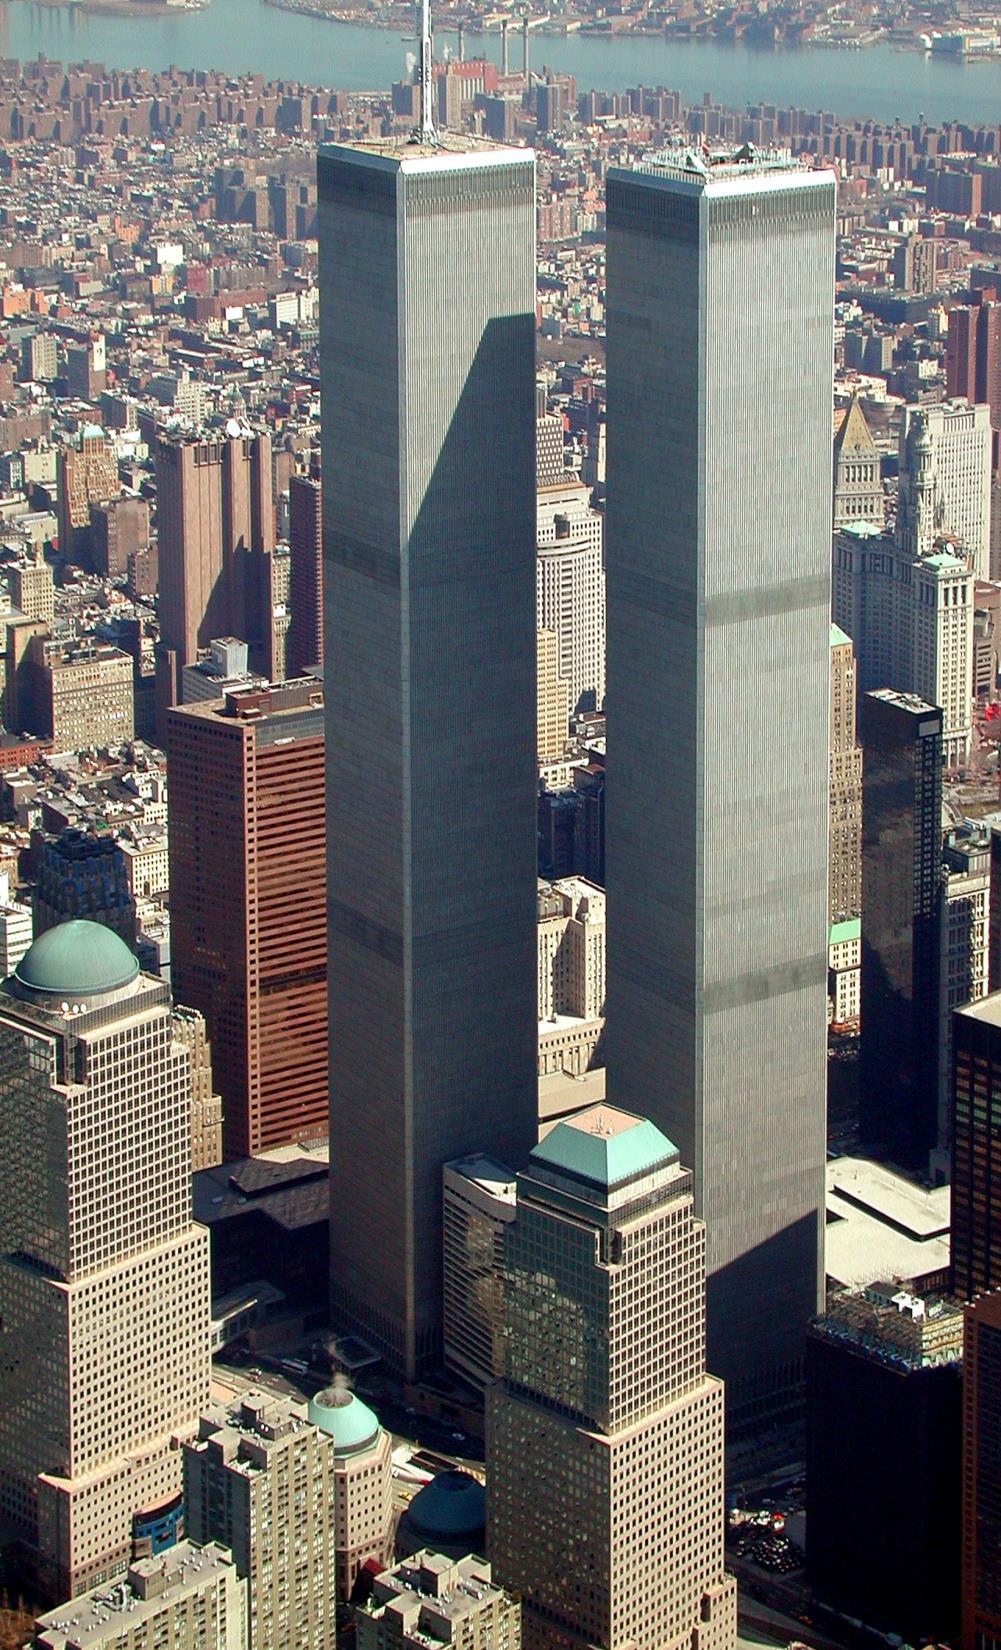 The World Trade Center was a plaza of many businesses. The Twin Towers were the tallest of all of them.